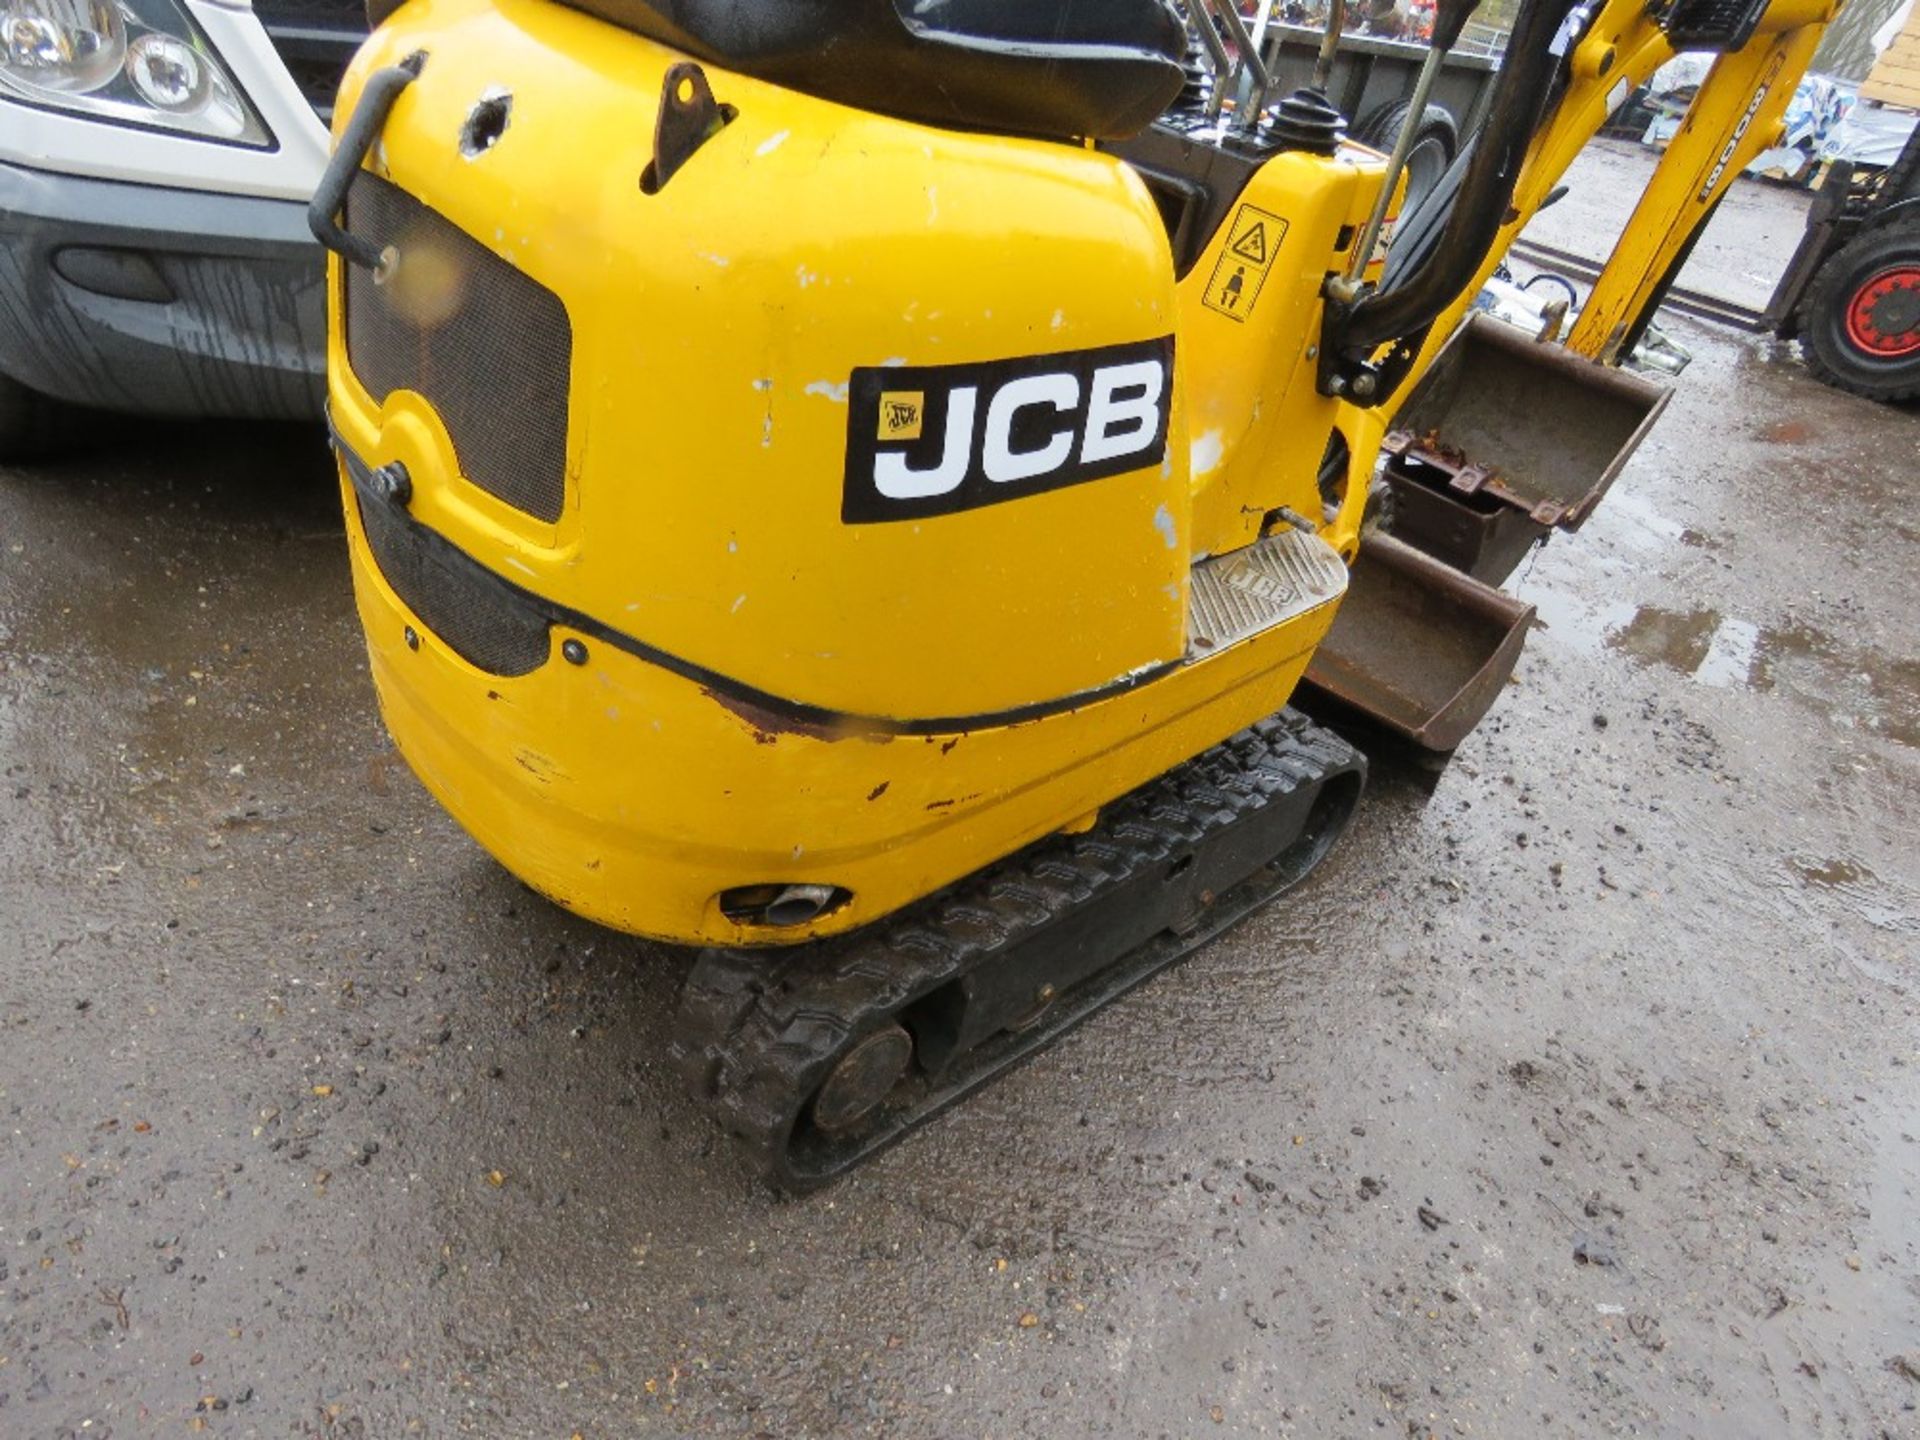 JCB 8008CTS MICRO EXCAVATOR YEAR 2019. 463 REC HOURS. 3 NO BUCKETS. needs some attention - Image 4 of 10